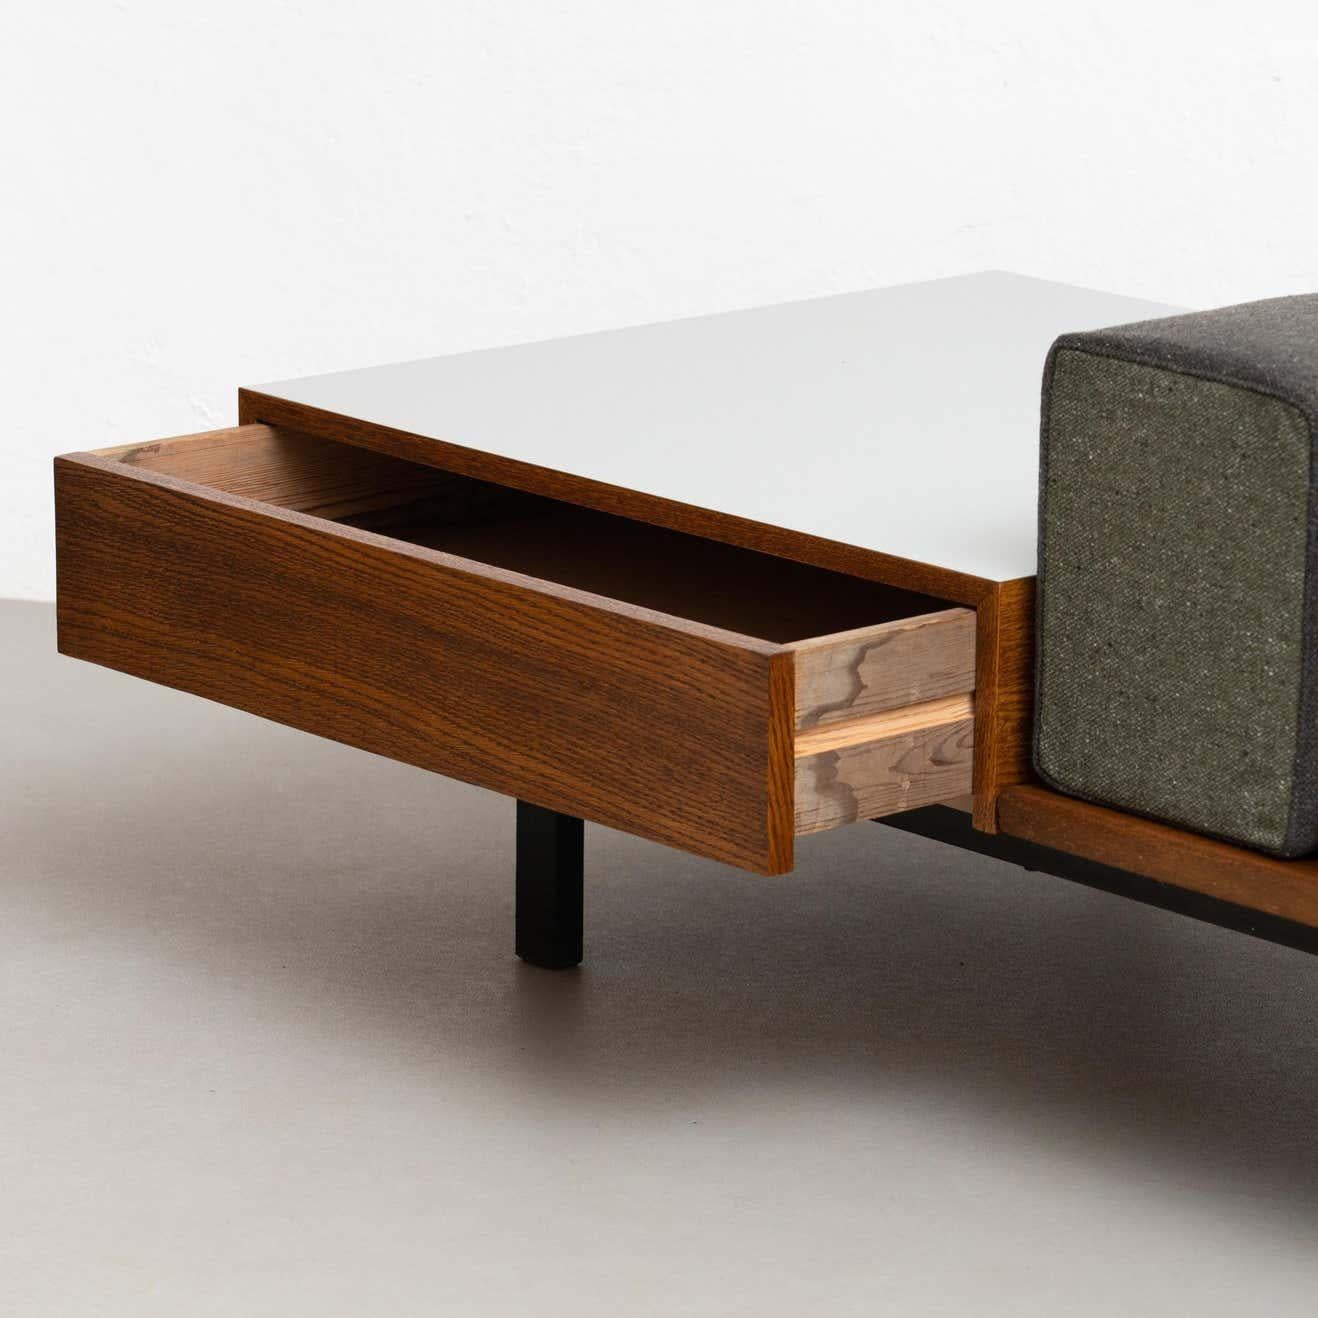 Charlotte Perriand Cansado Bench with a Drawer, circa 1958 In Good Condition For Sale In Barcelona, Barcelona